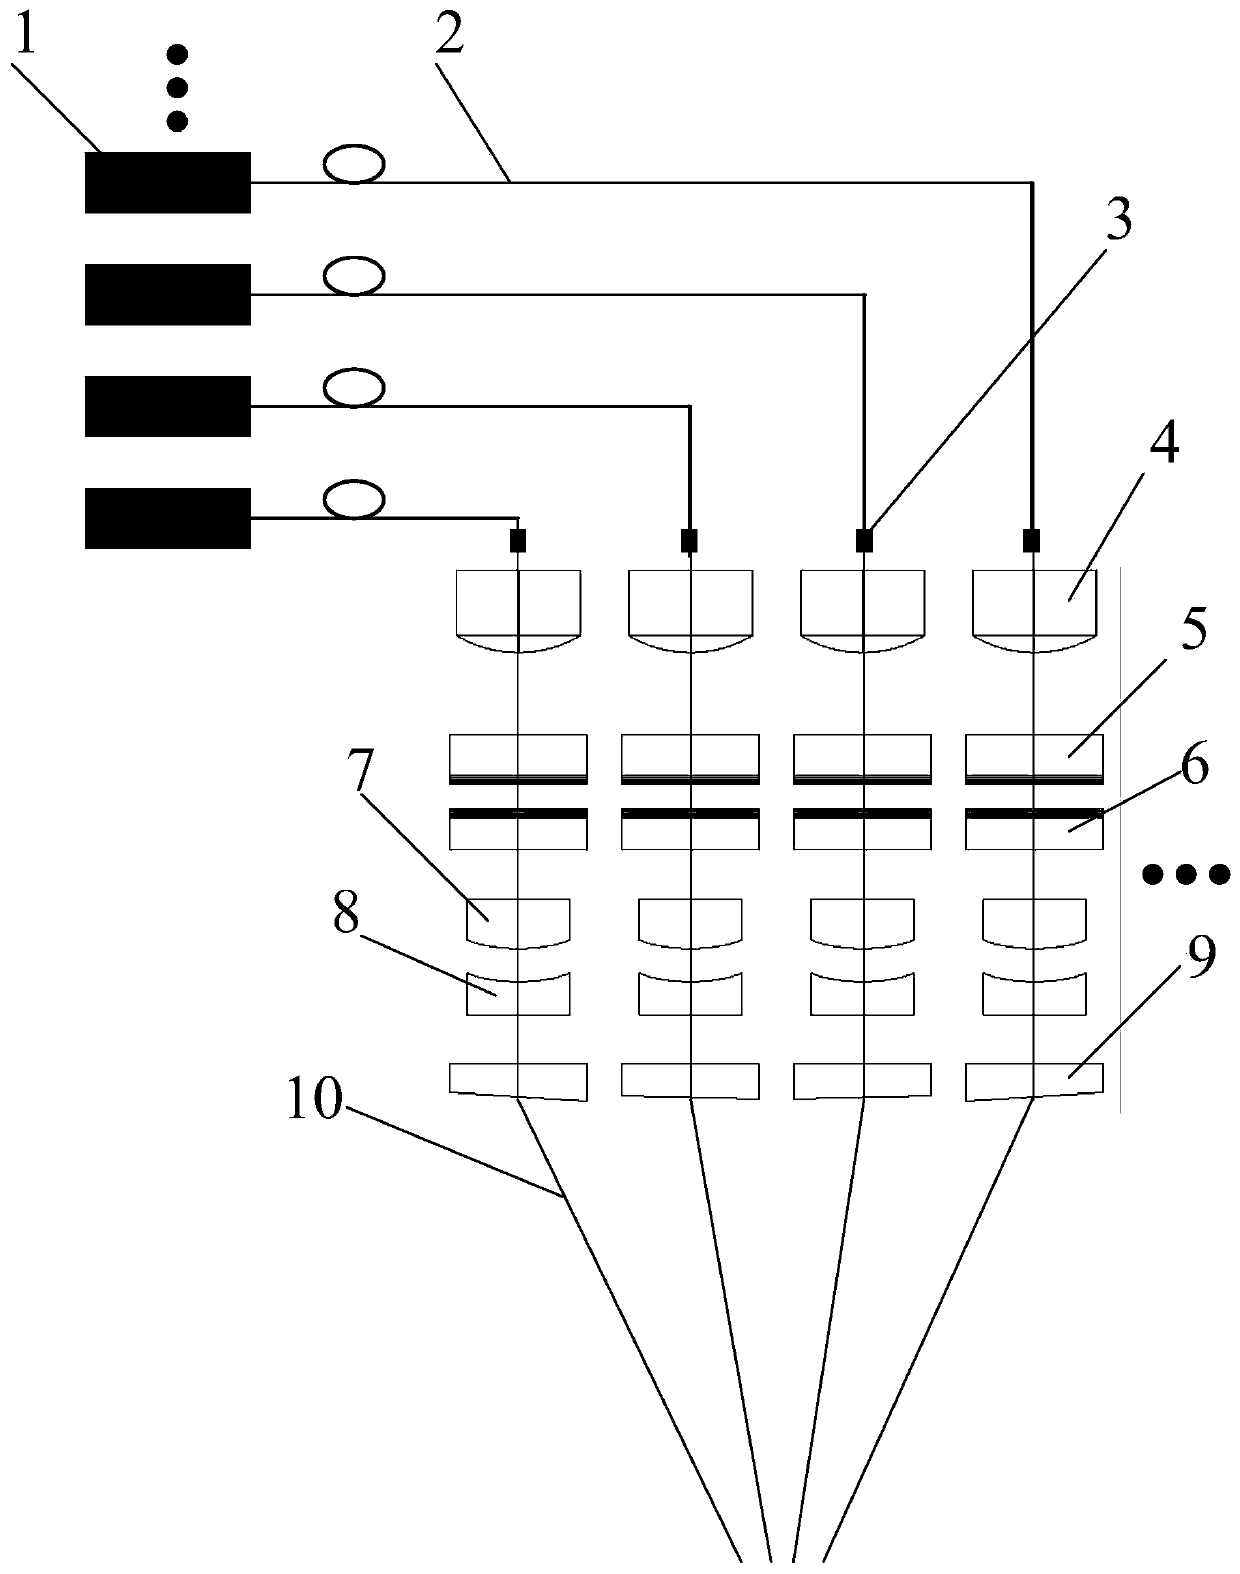 A laser output system and welding method for intensive multi-point simultaneous welding